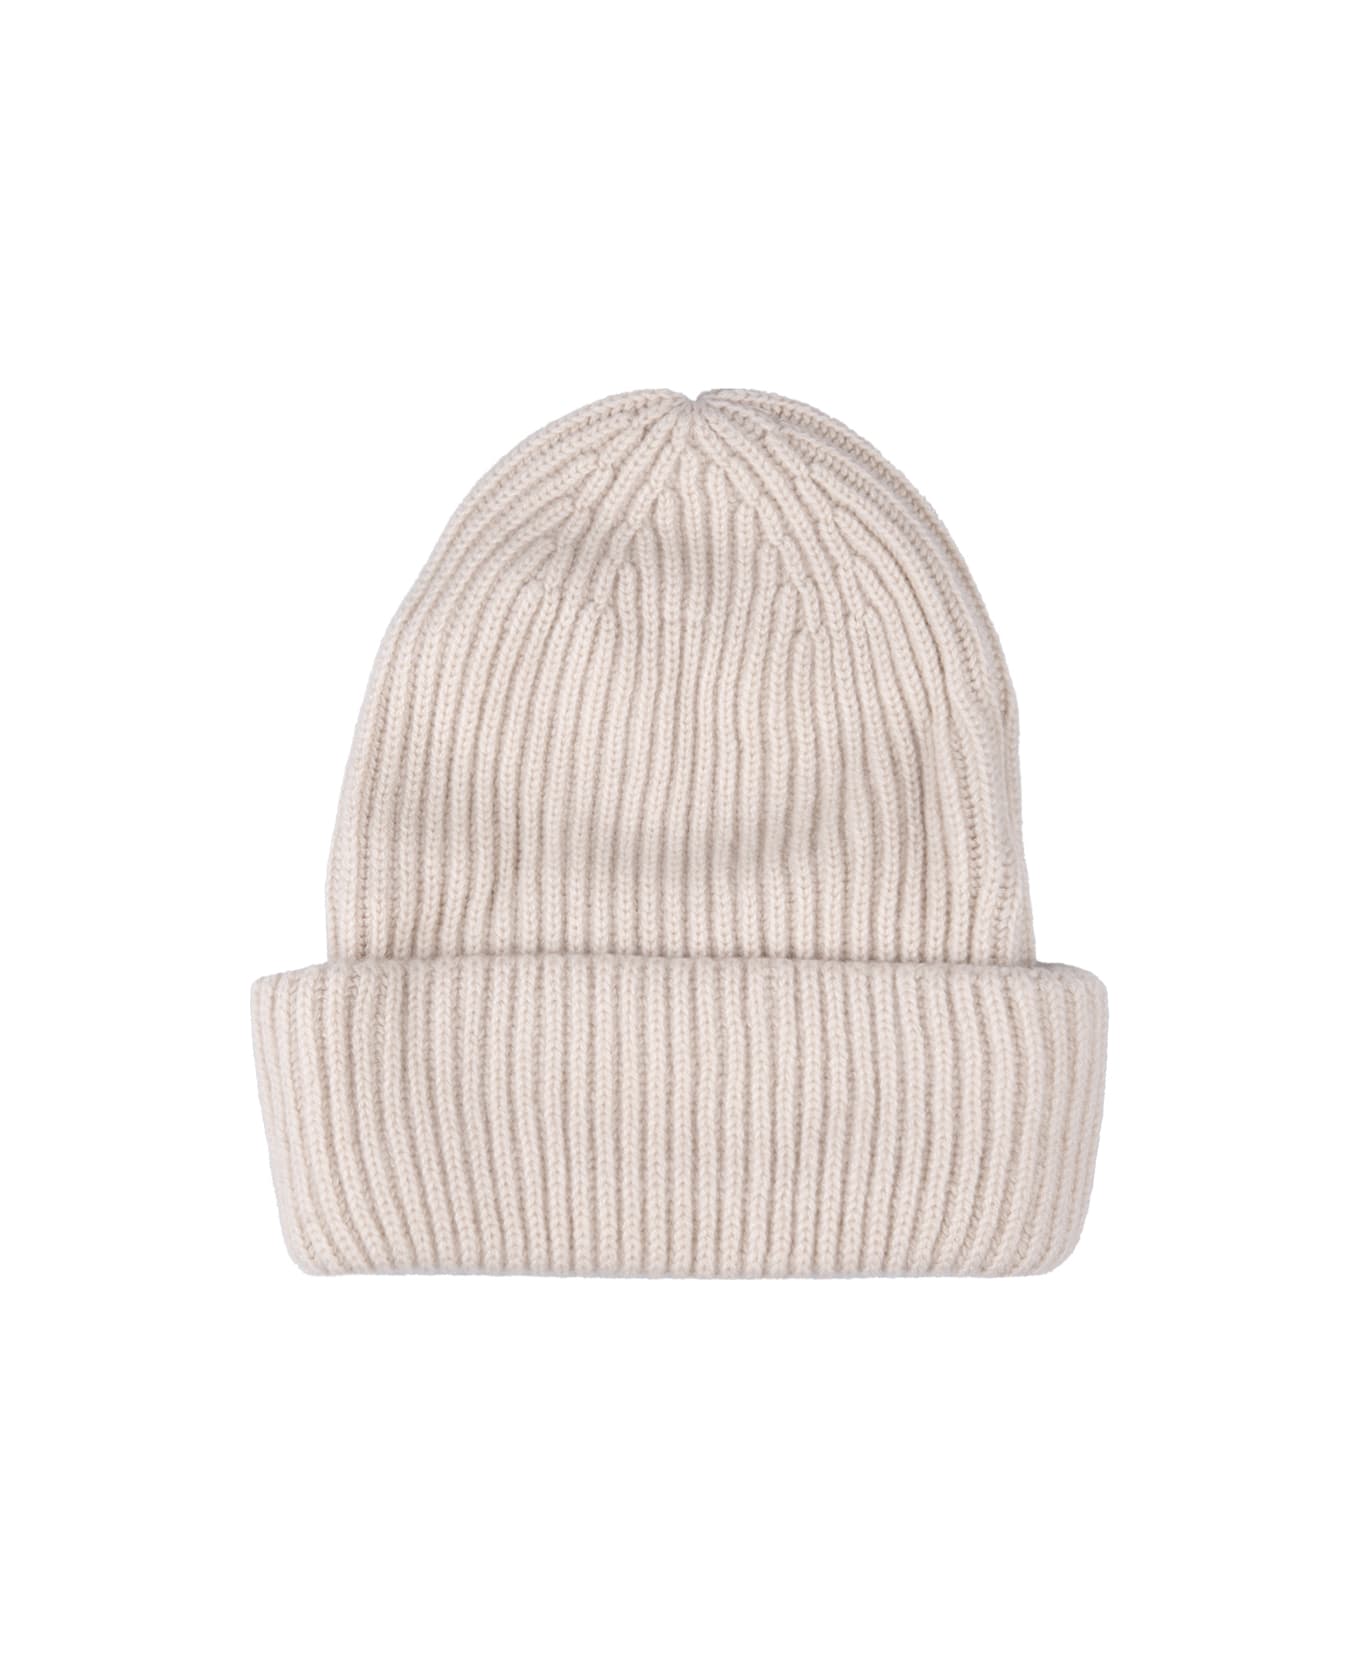 Fedeli Gold Ribbed Cashmere Beanie - Brown